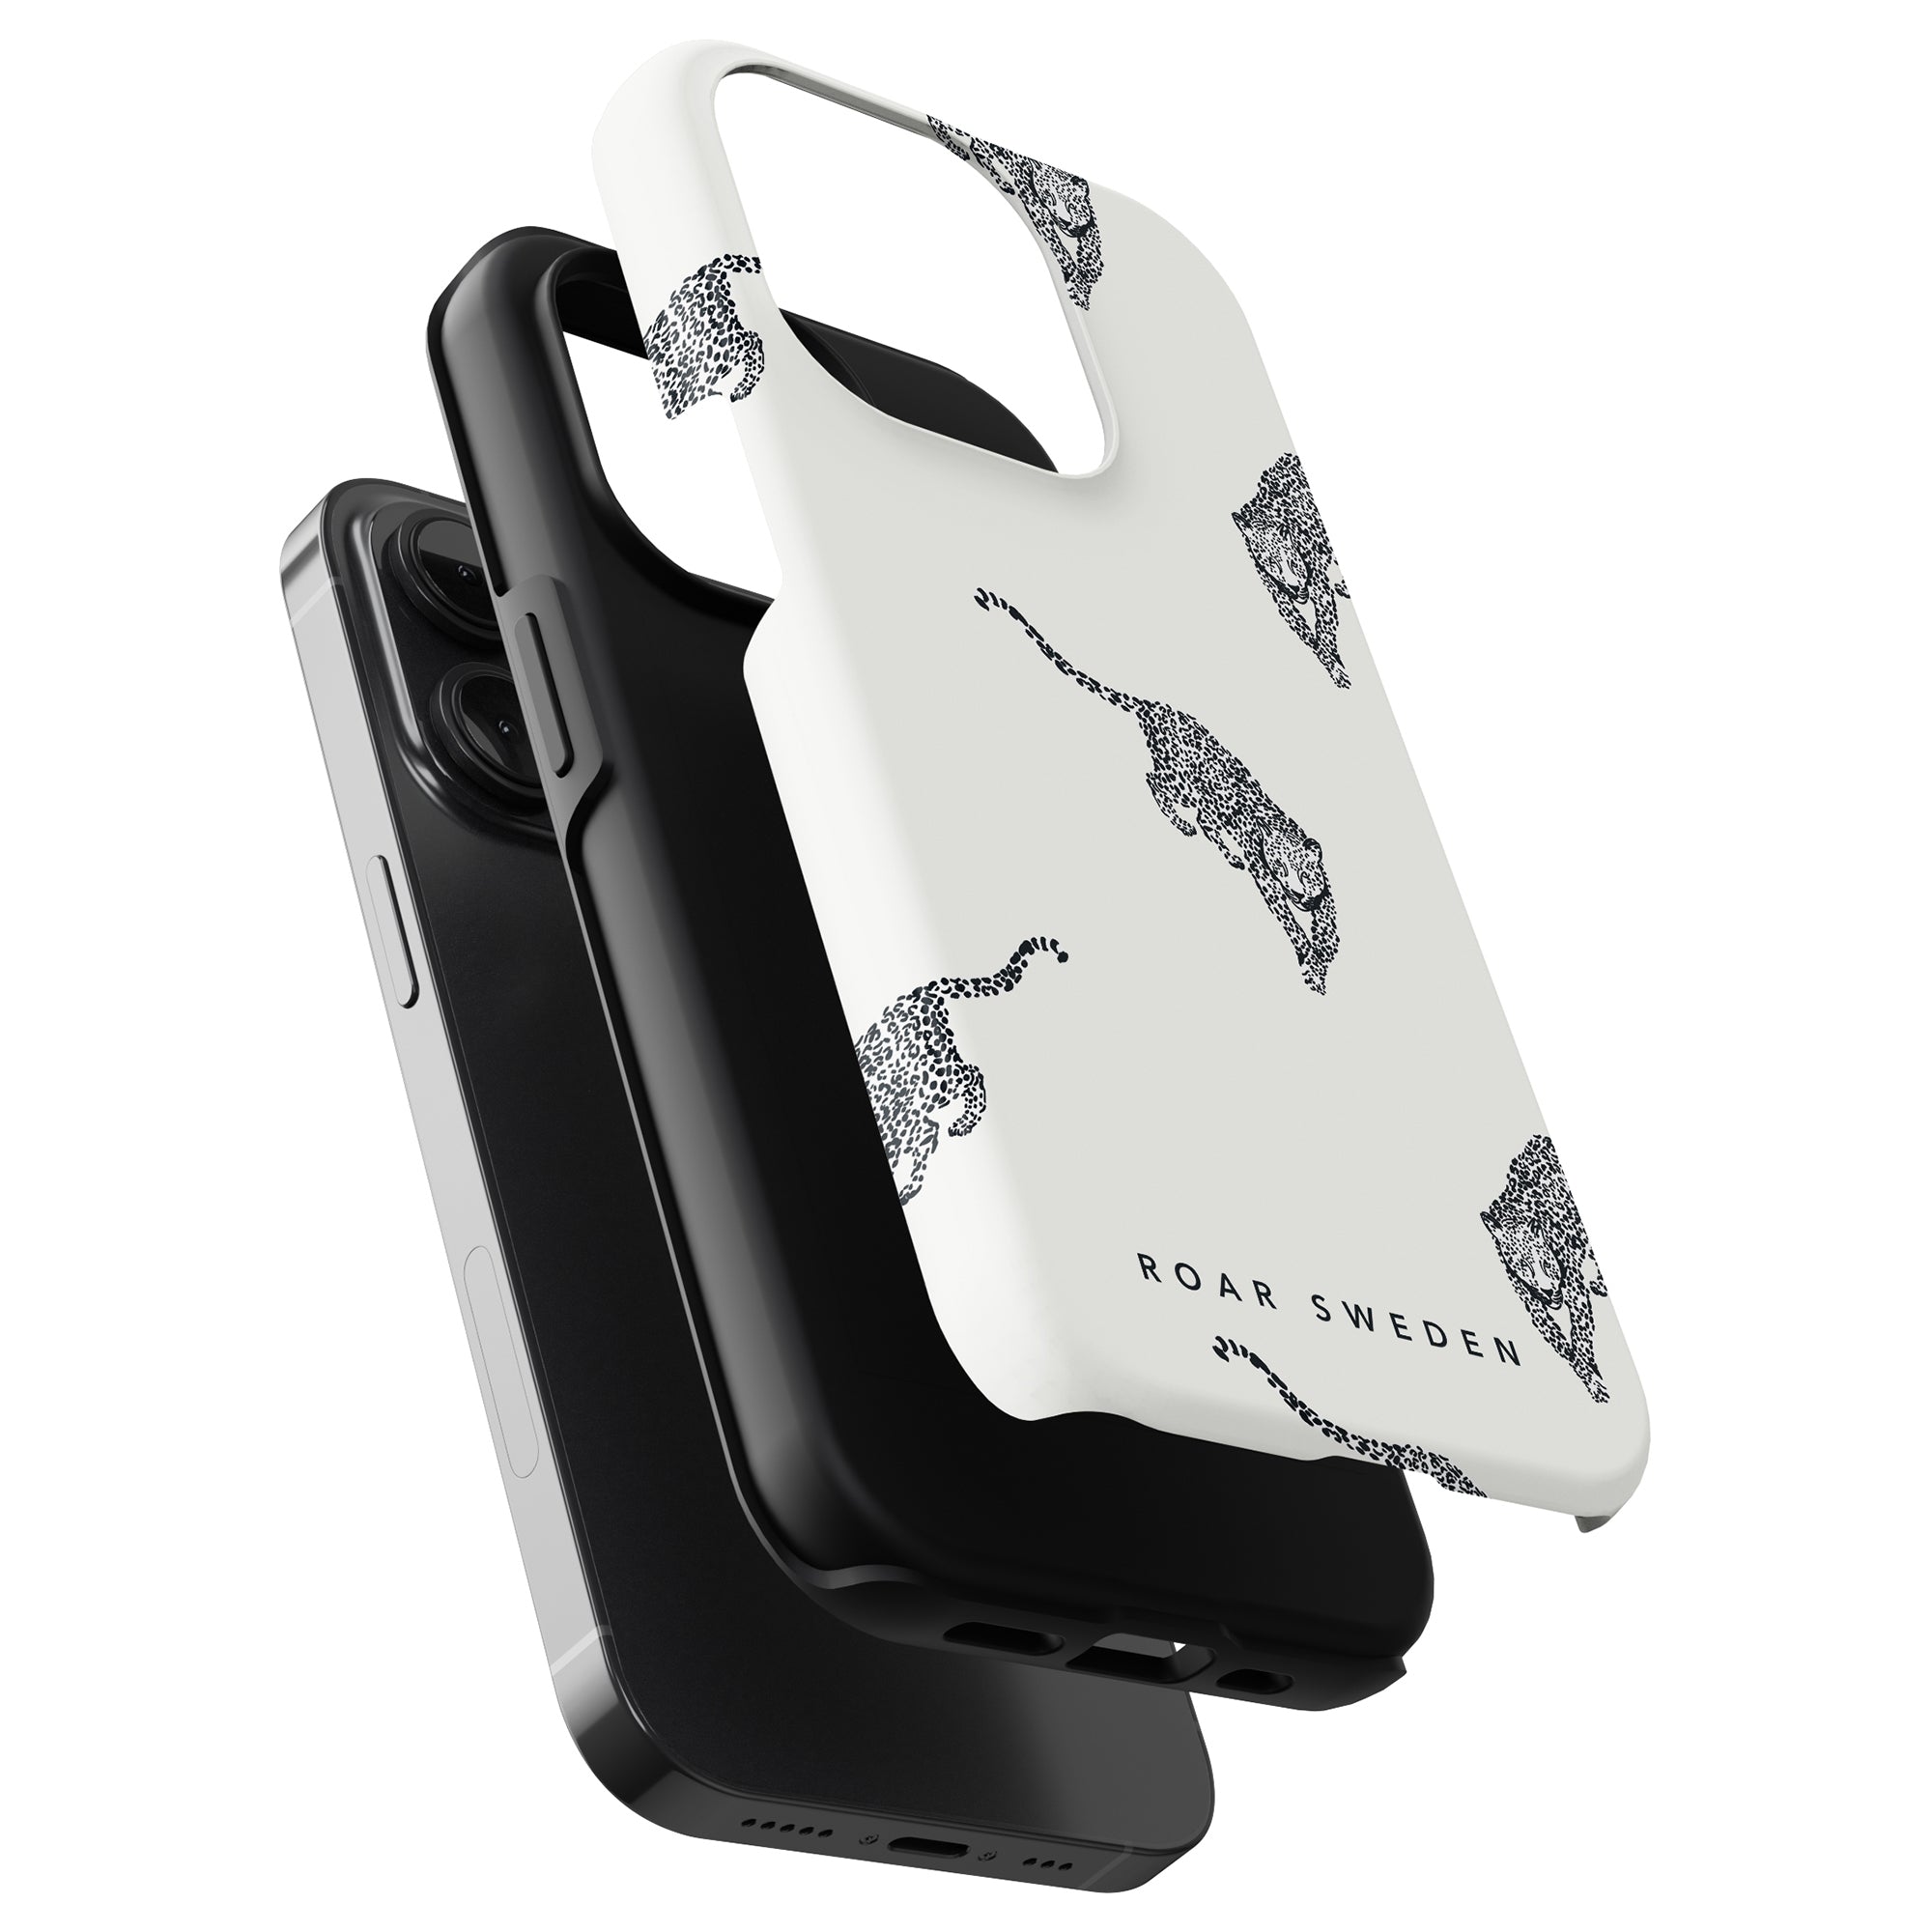 A white Kitty Deluxe - Tough Case with a tiger print on it, showcasing elegance and innovation.